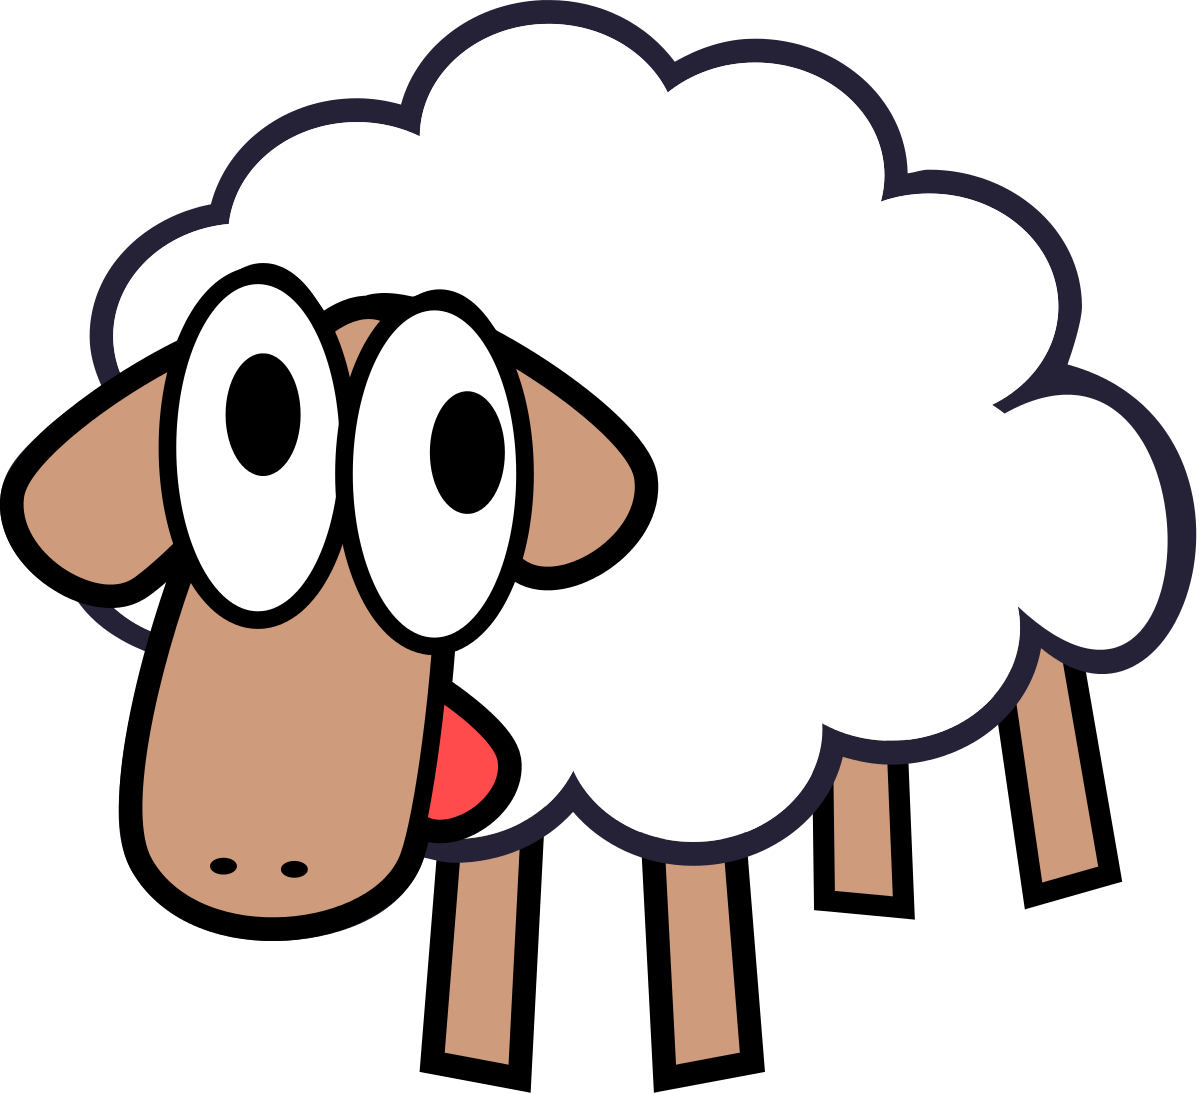 Lamb outline sheep clip art free clipart images image cliparting ...